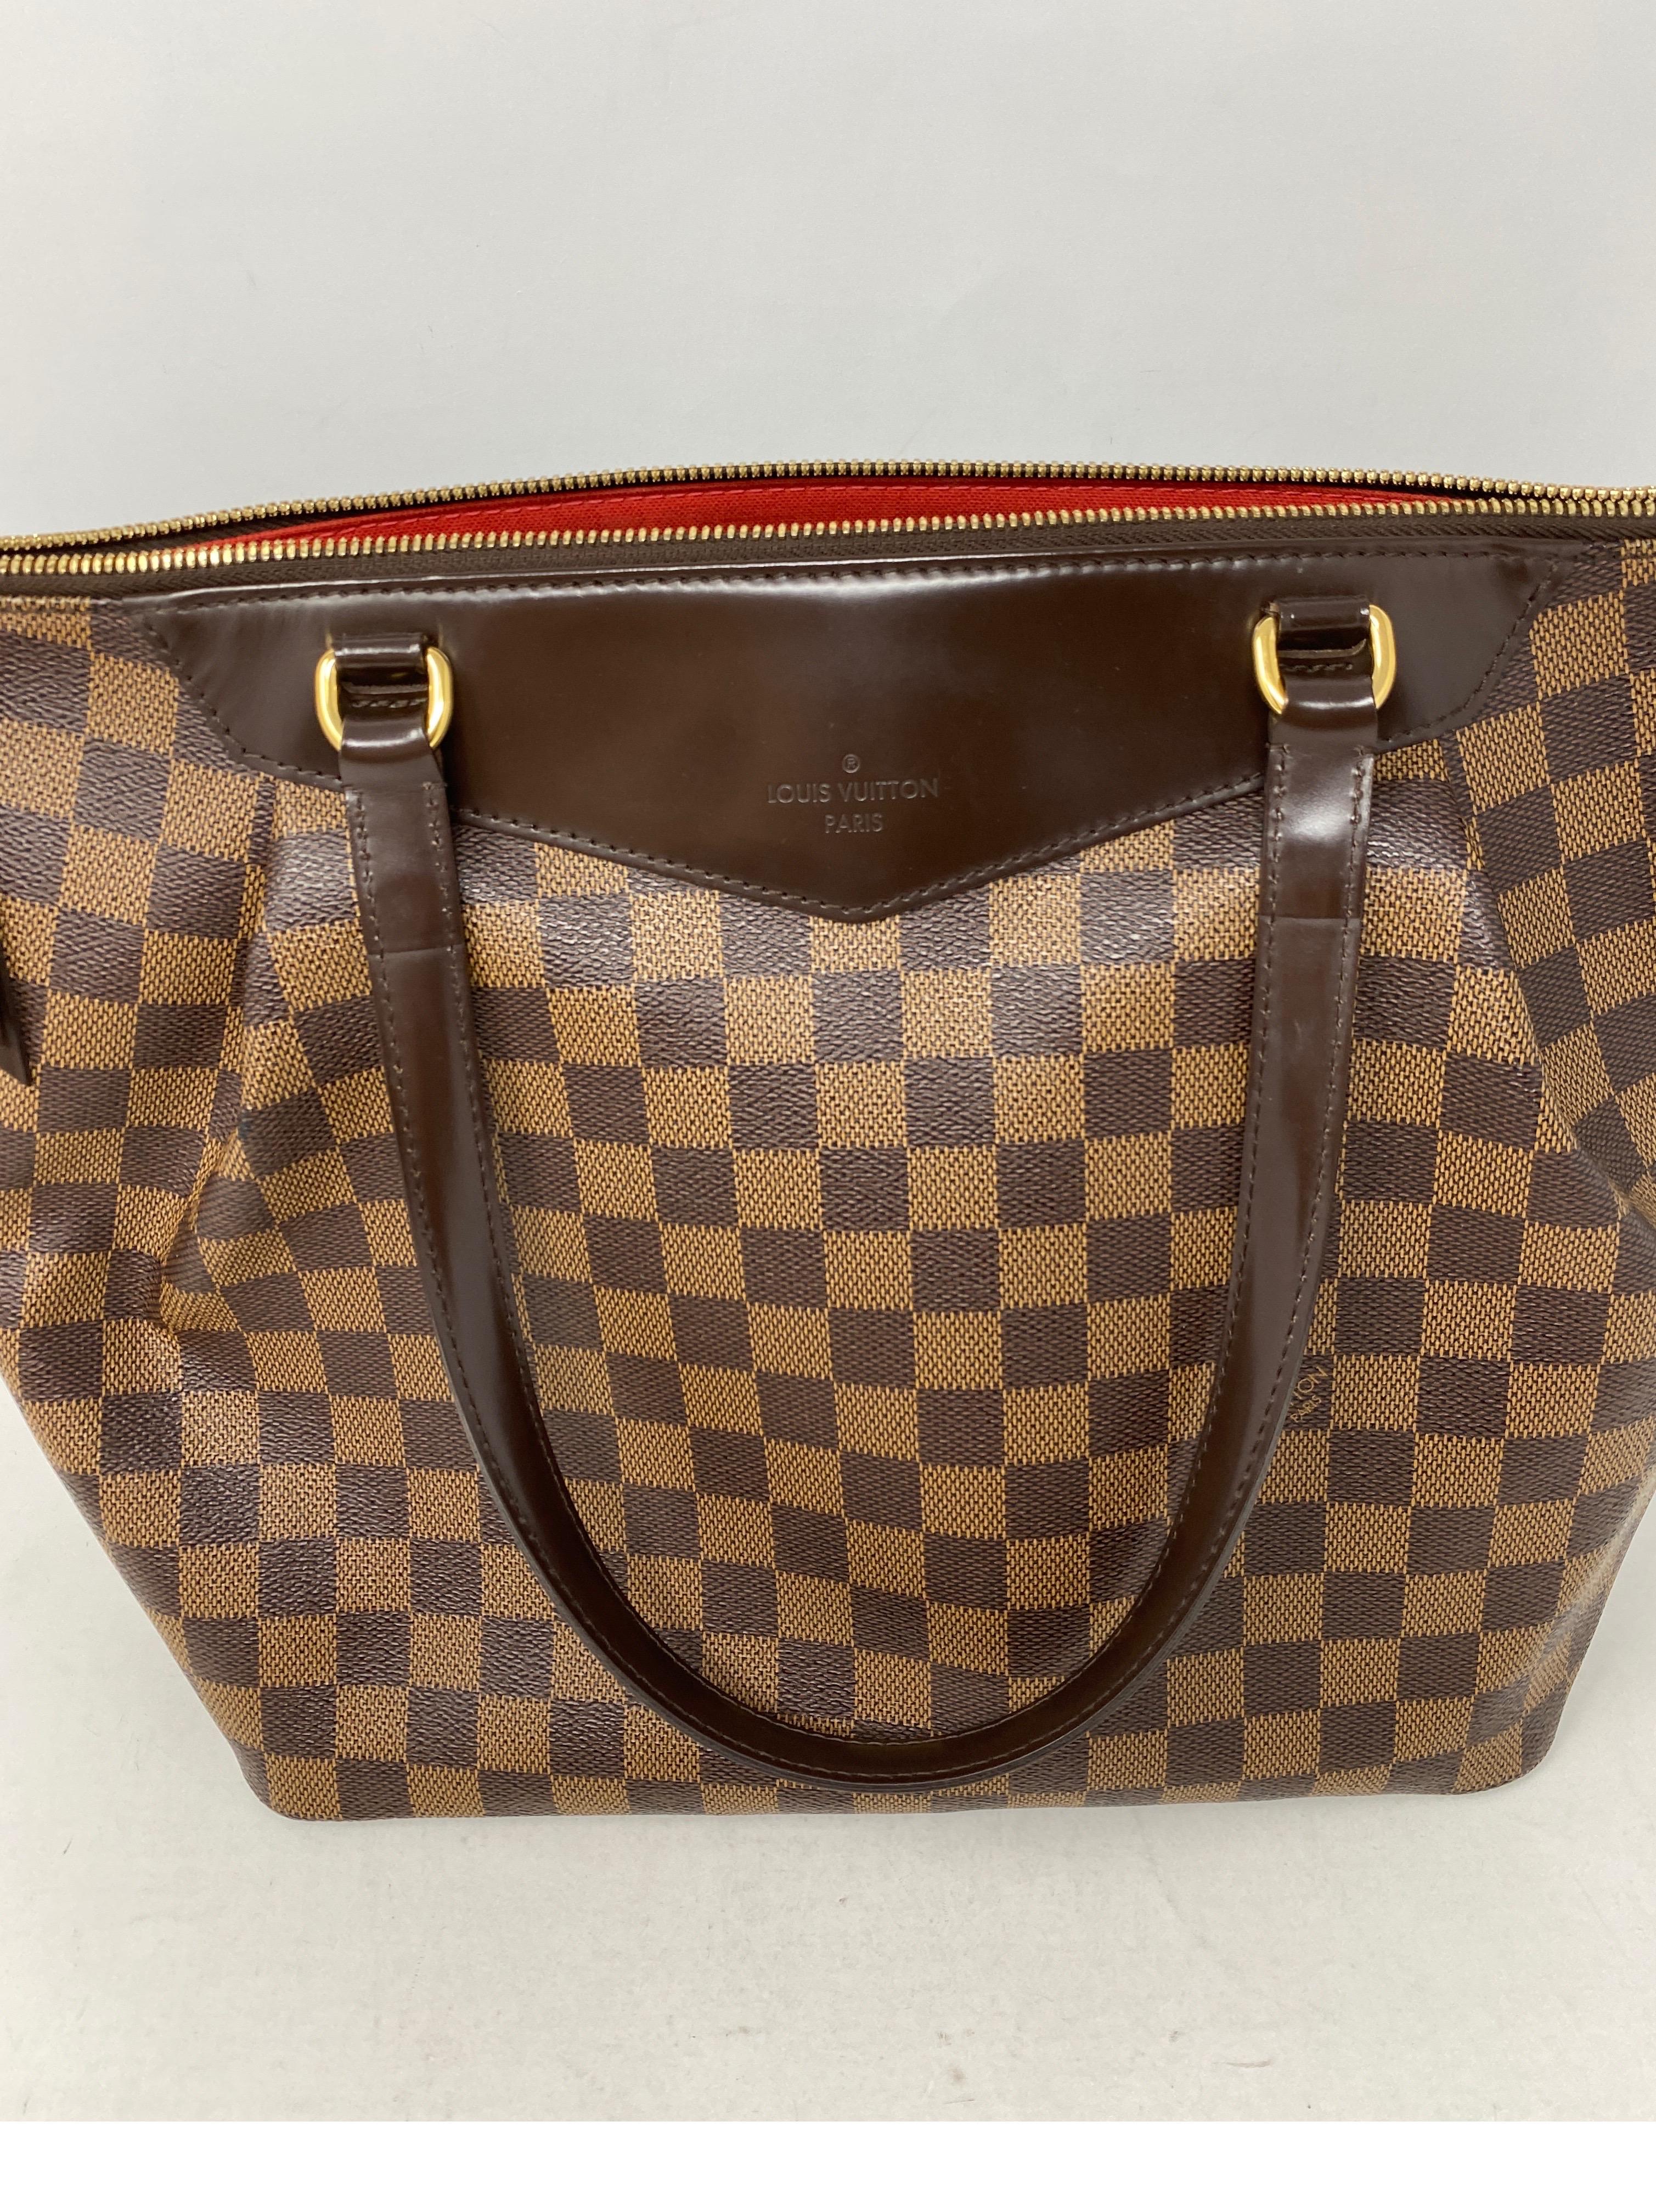 Louis Vuitton Westminster GM Damier Ebene Bag. Excellent like new condition. Red inerior. Clean. Retired style. Great classic bag. 